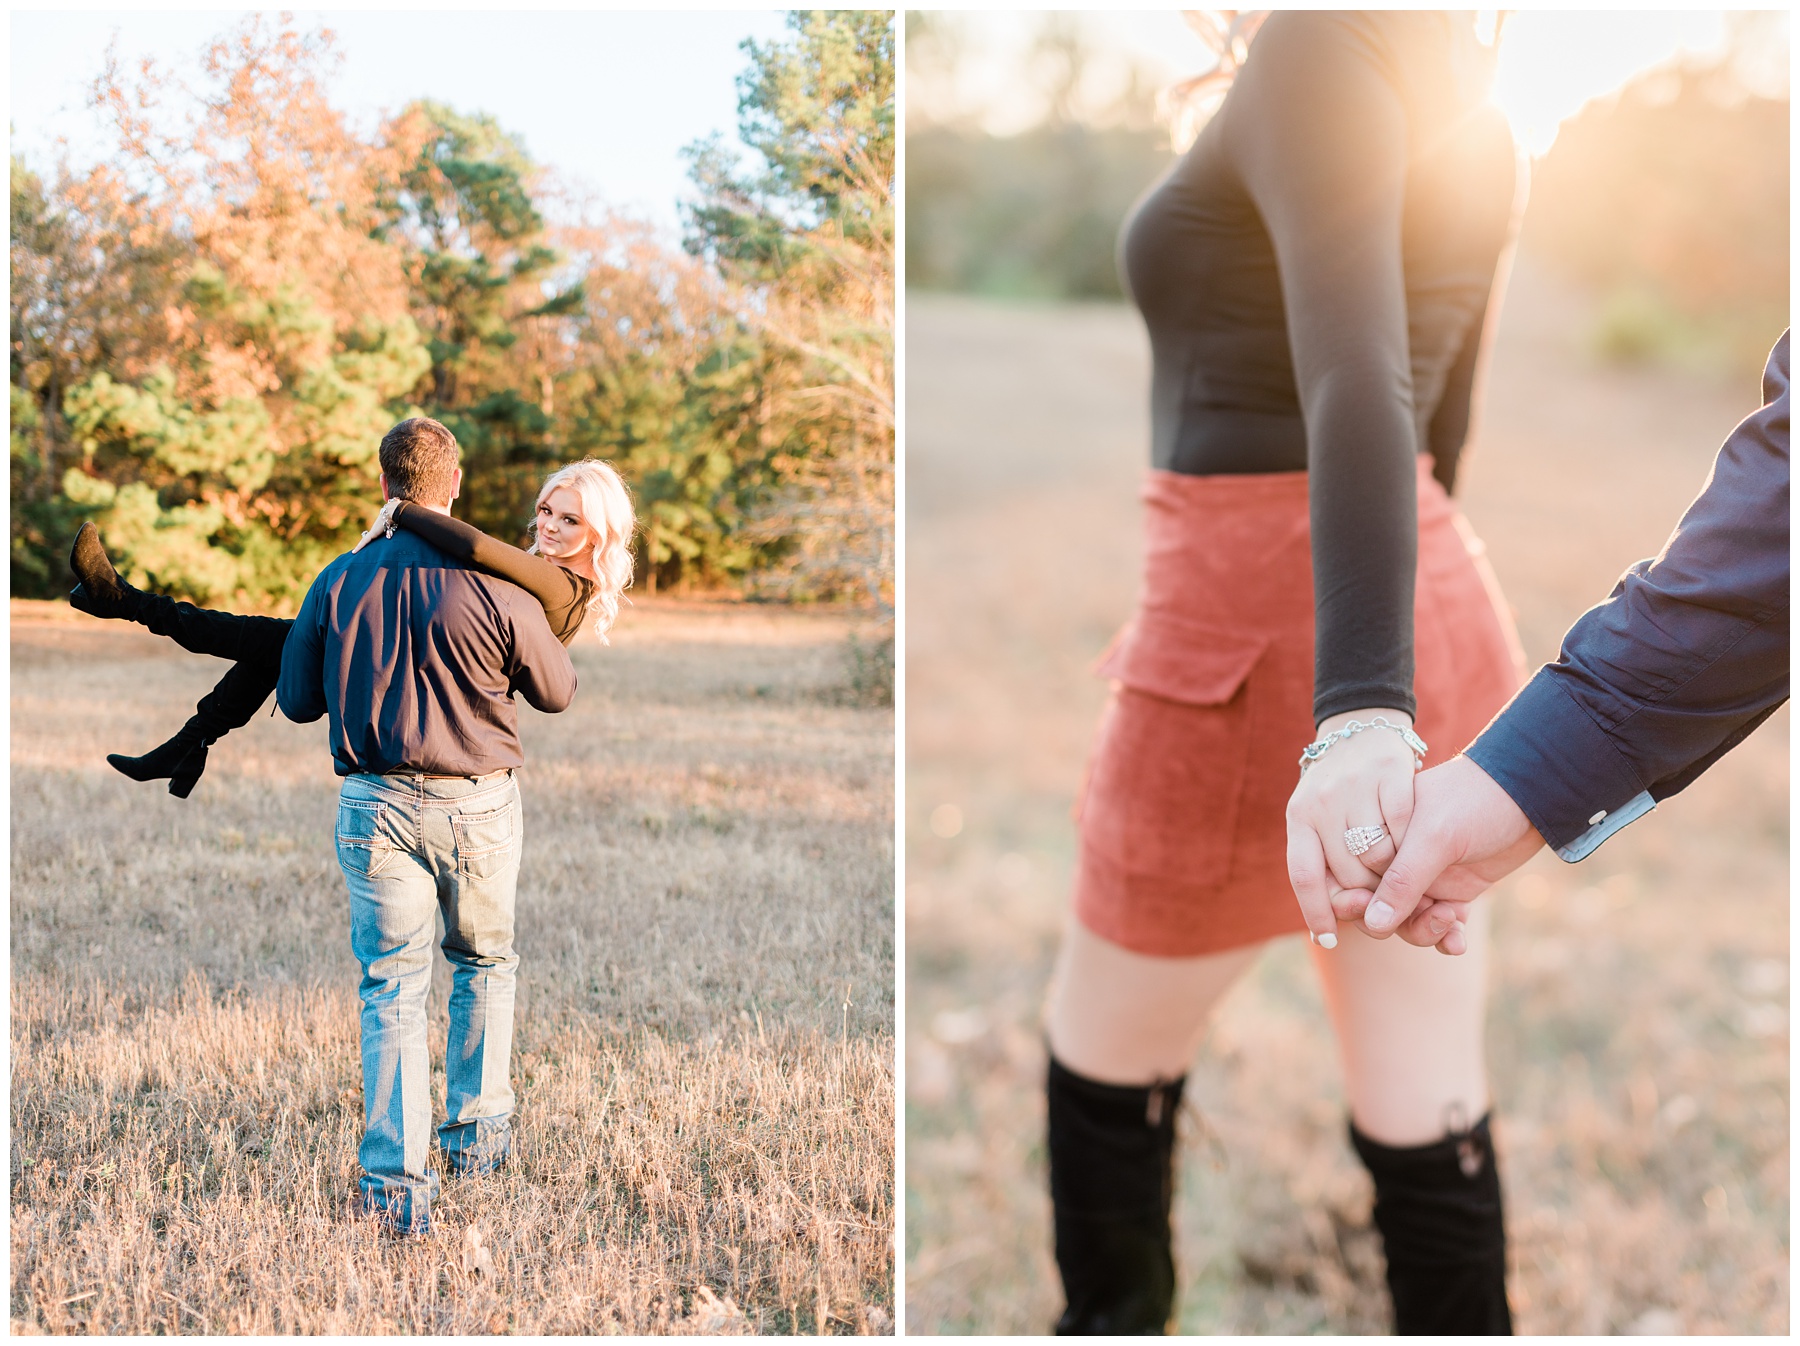 Stylish Fall Outfit | Five Oaks Cabin Engagement Session LaRue TX by East Texas Wedding Photographer Karina Danielle